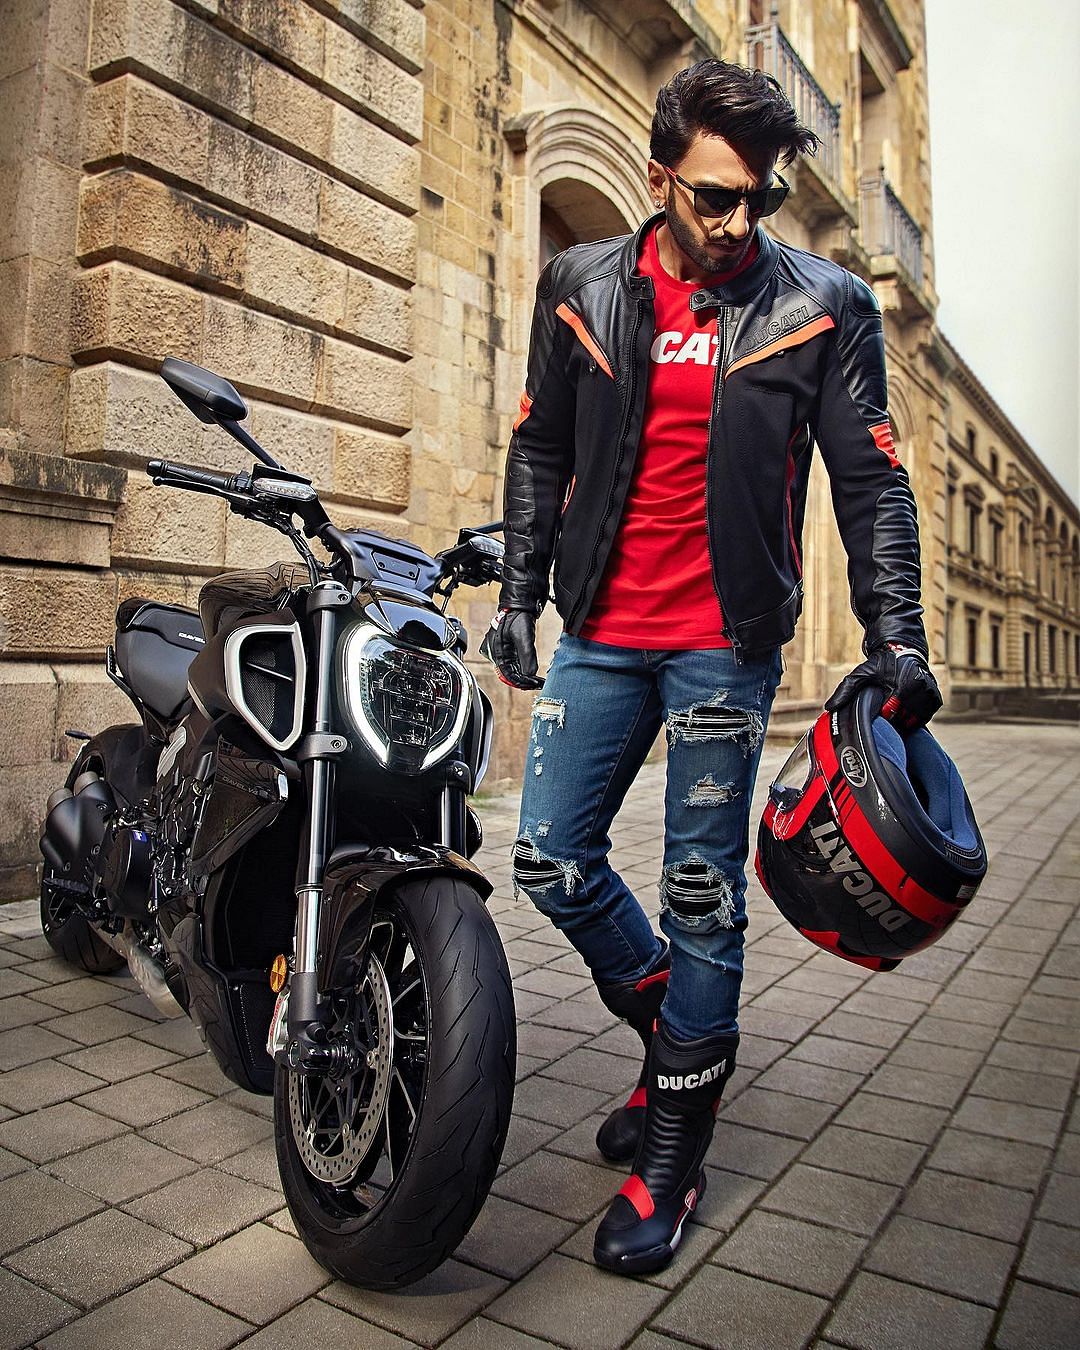 Singh's collaboration with Ducati India